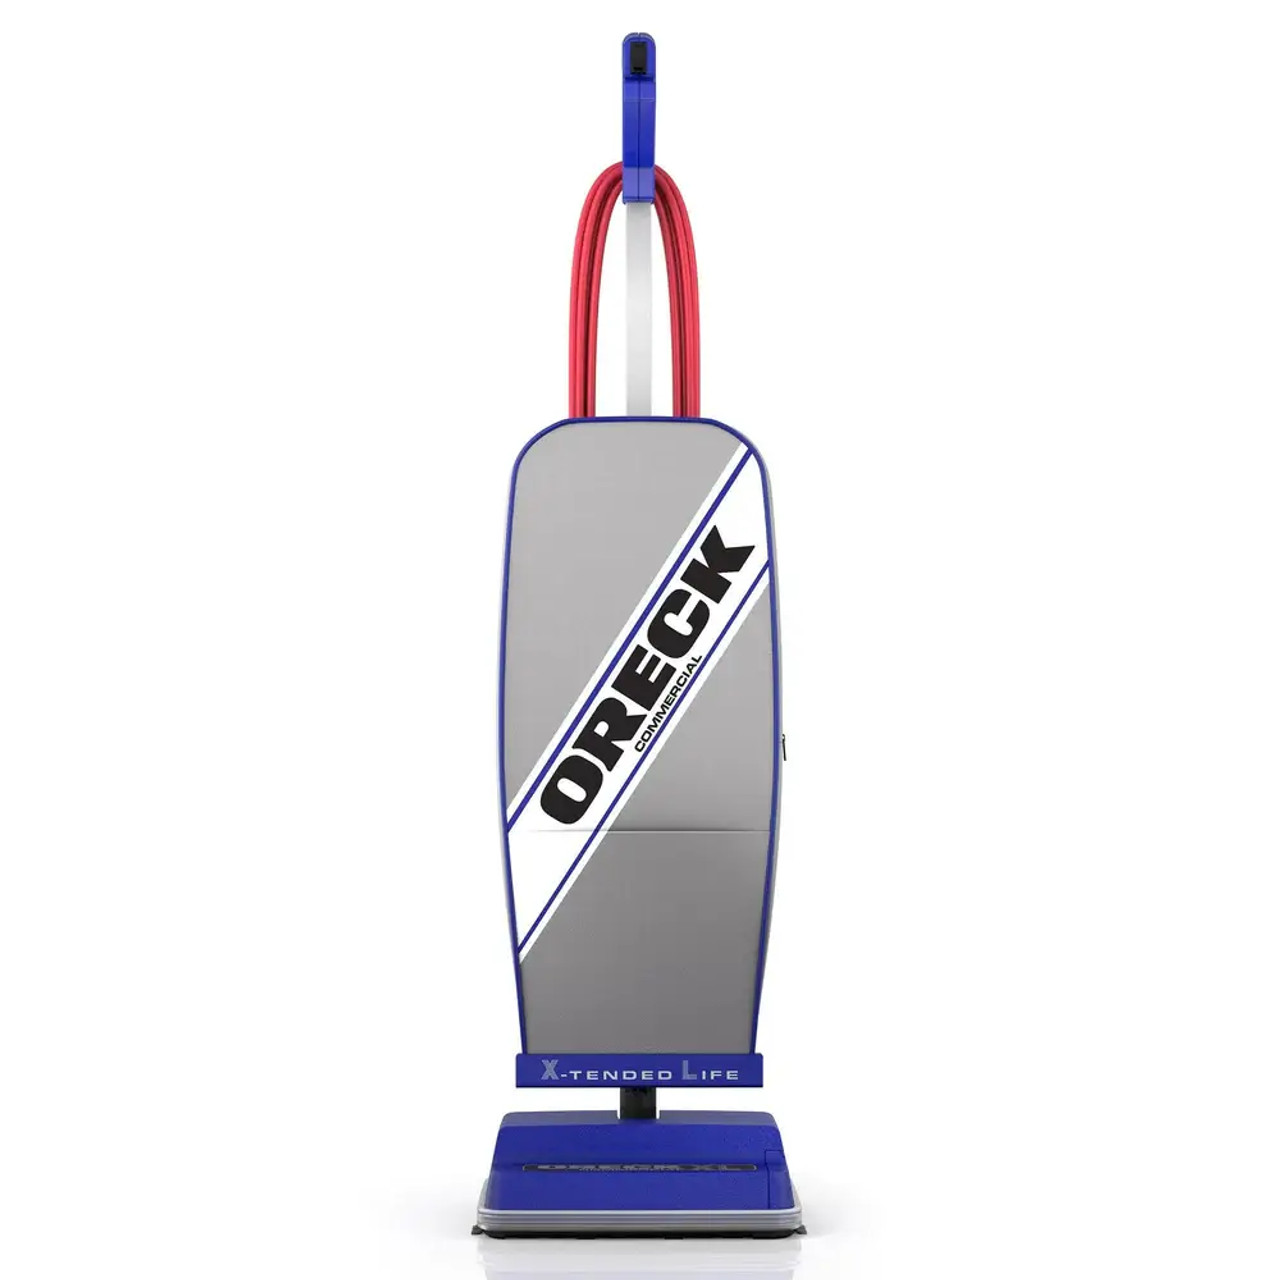 Oreck 12" Lightweight Upright Bagged Vacuum Cleaner | Effortless Cleaning and Maneuverability